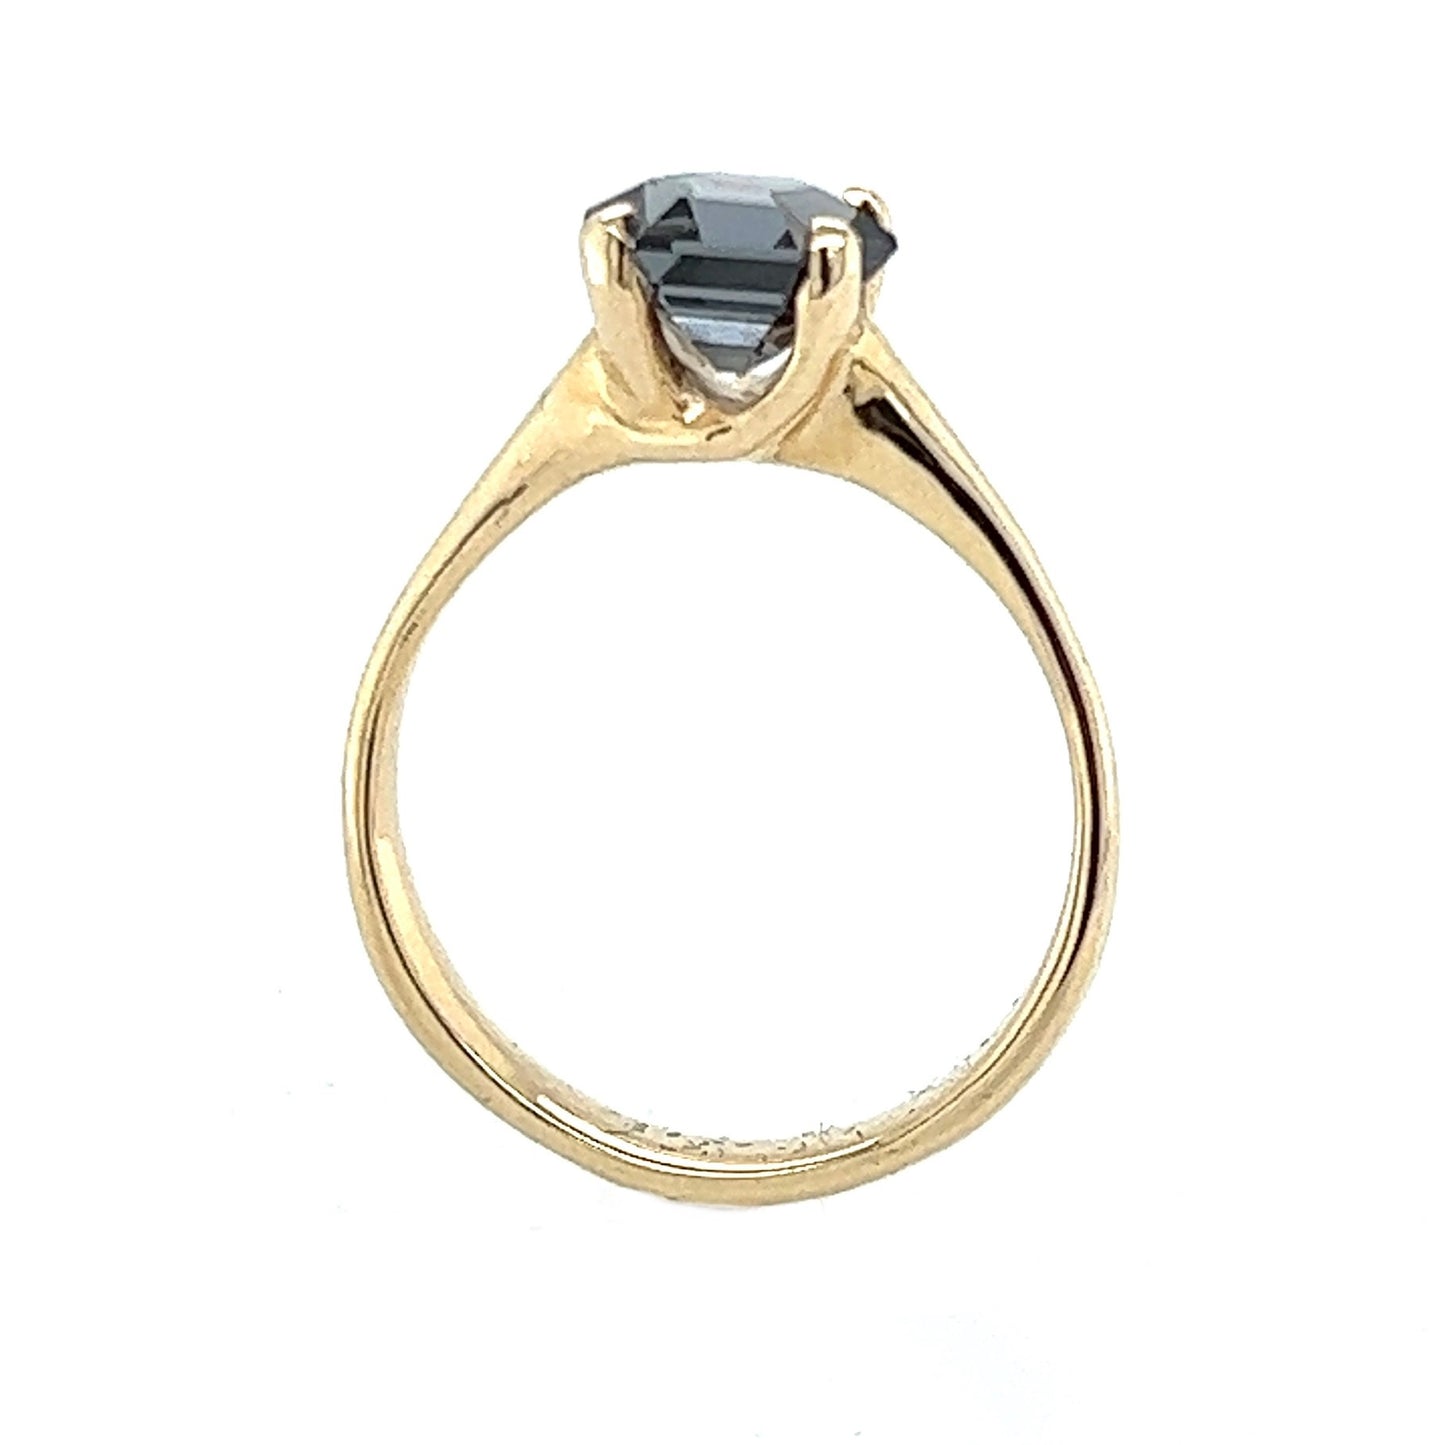 The Woven Tapered- Hexagon smoke spinel & 14k yellow gold